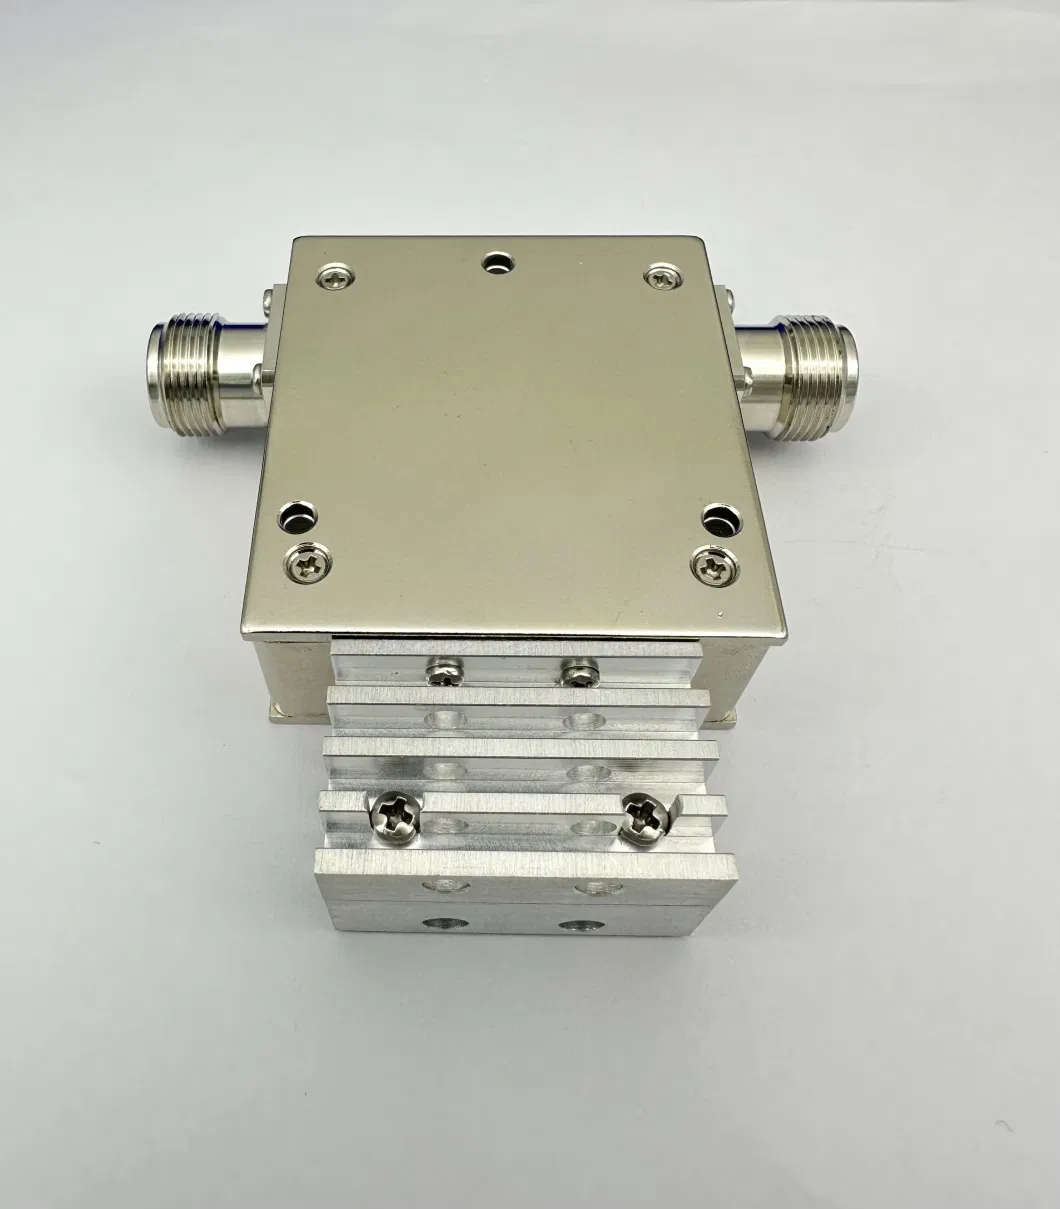 Yuecome 300~400MHz UHF Band RF Coaxial Isolator Microwave Components N or SMA Female